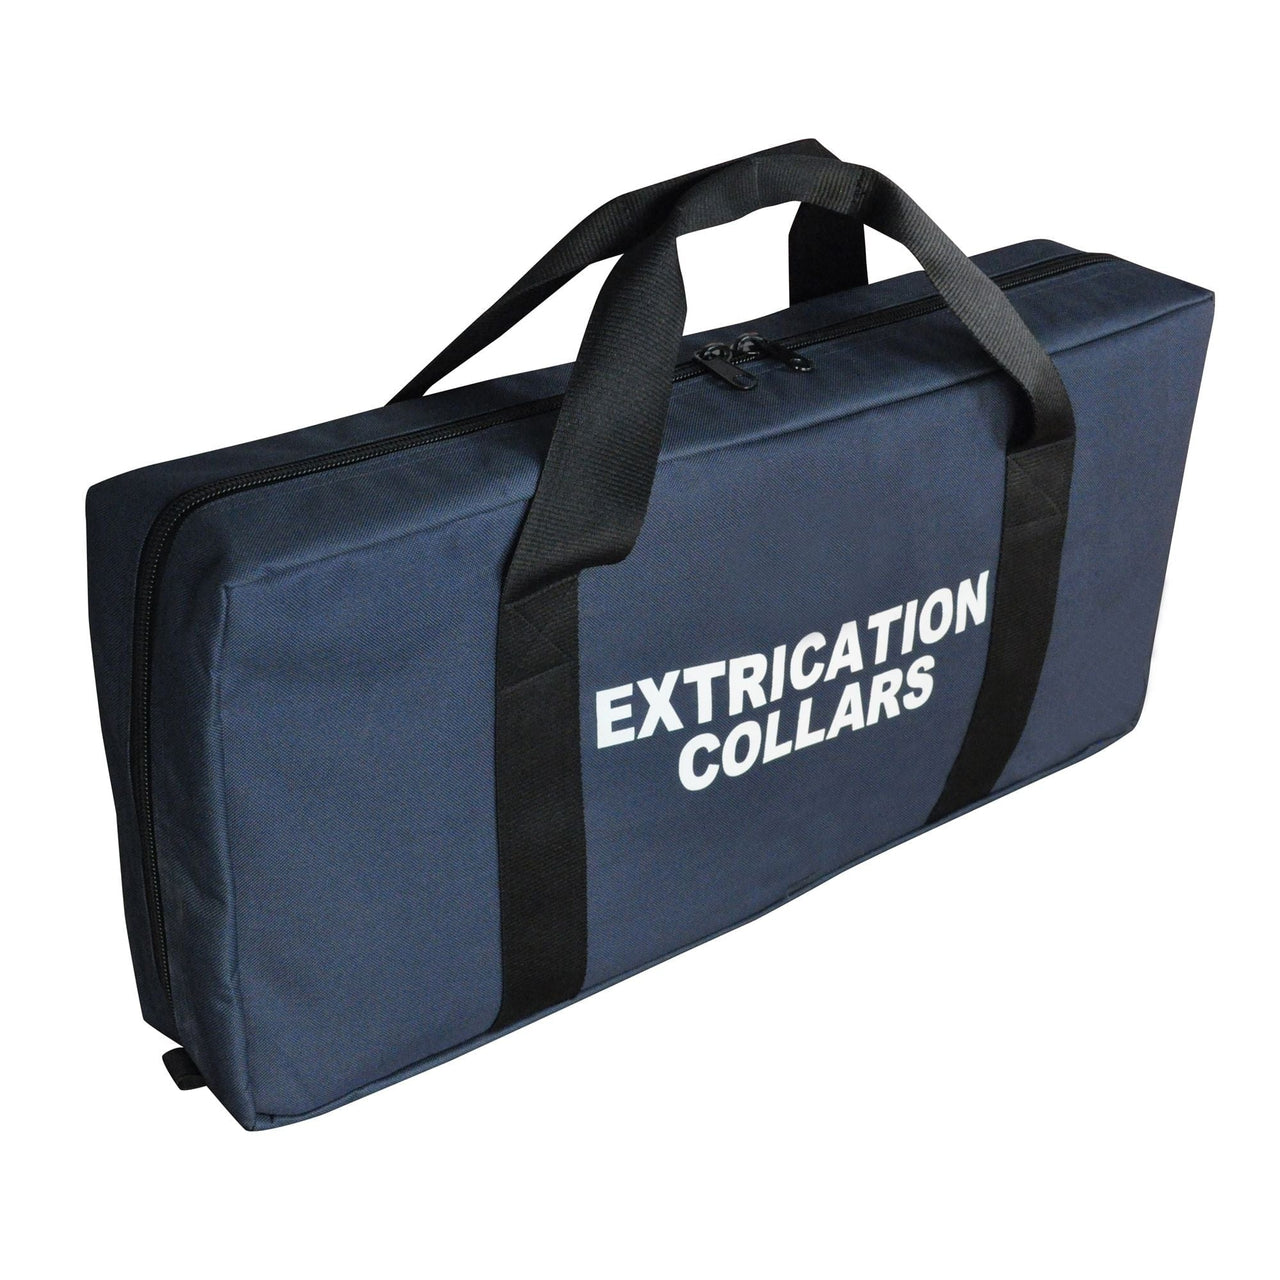 Paramedic Shop Add-Tech Pty Ltd Pouch Extraction Collar Bag - BAG ONLY